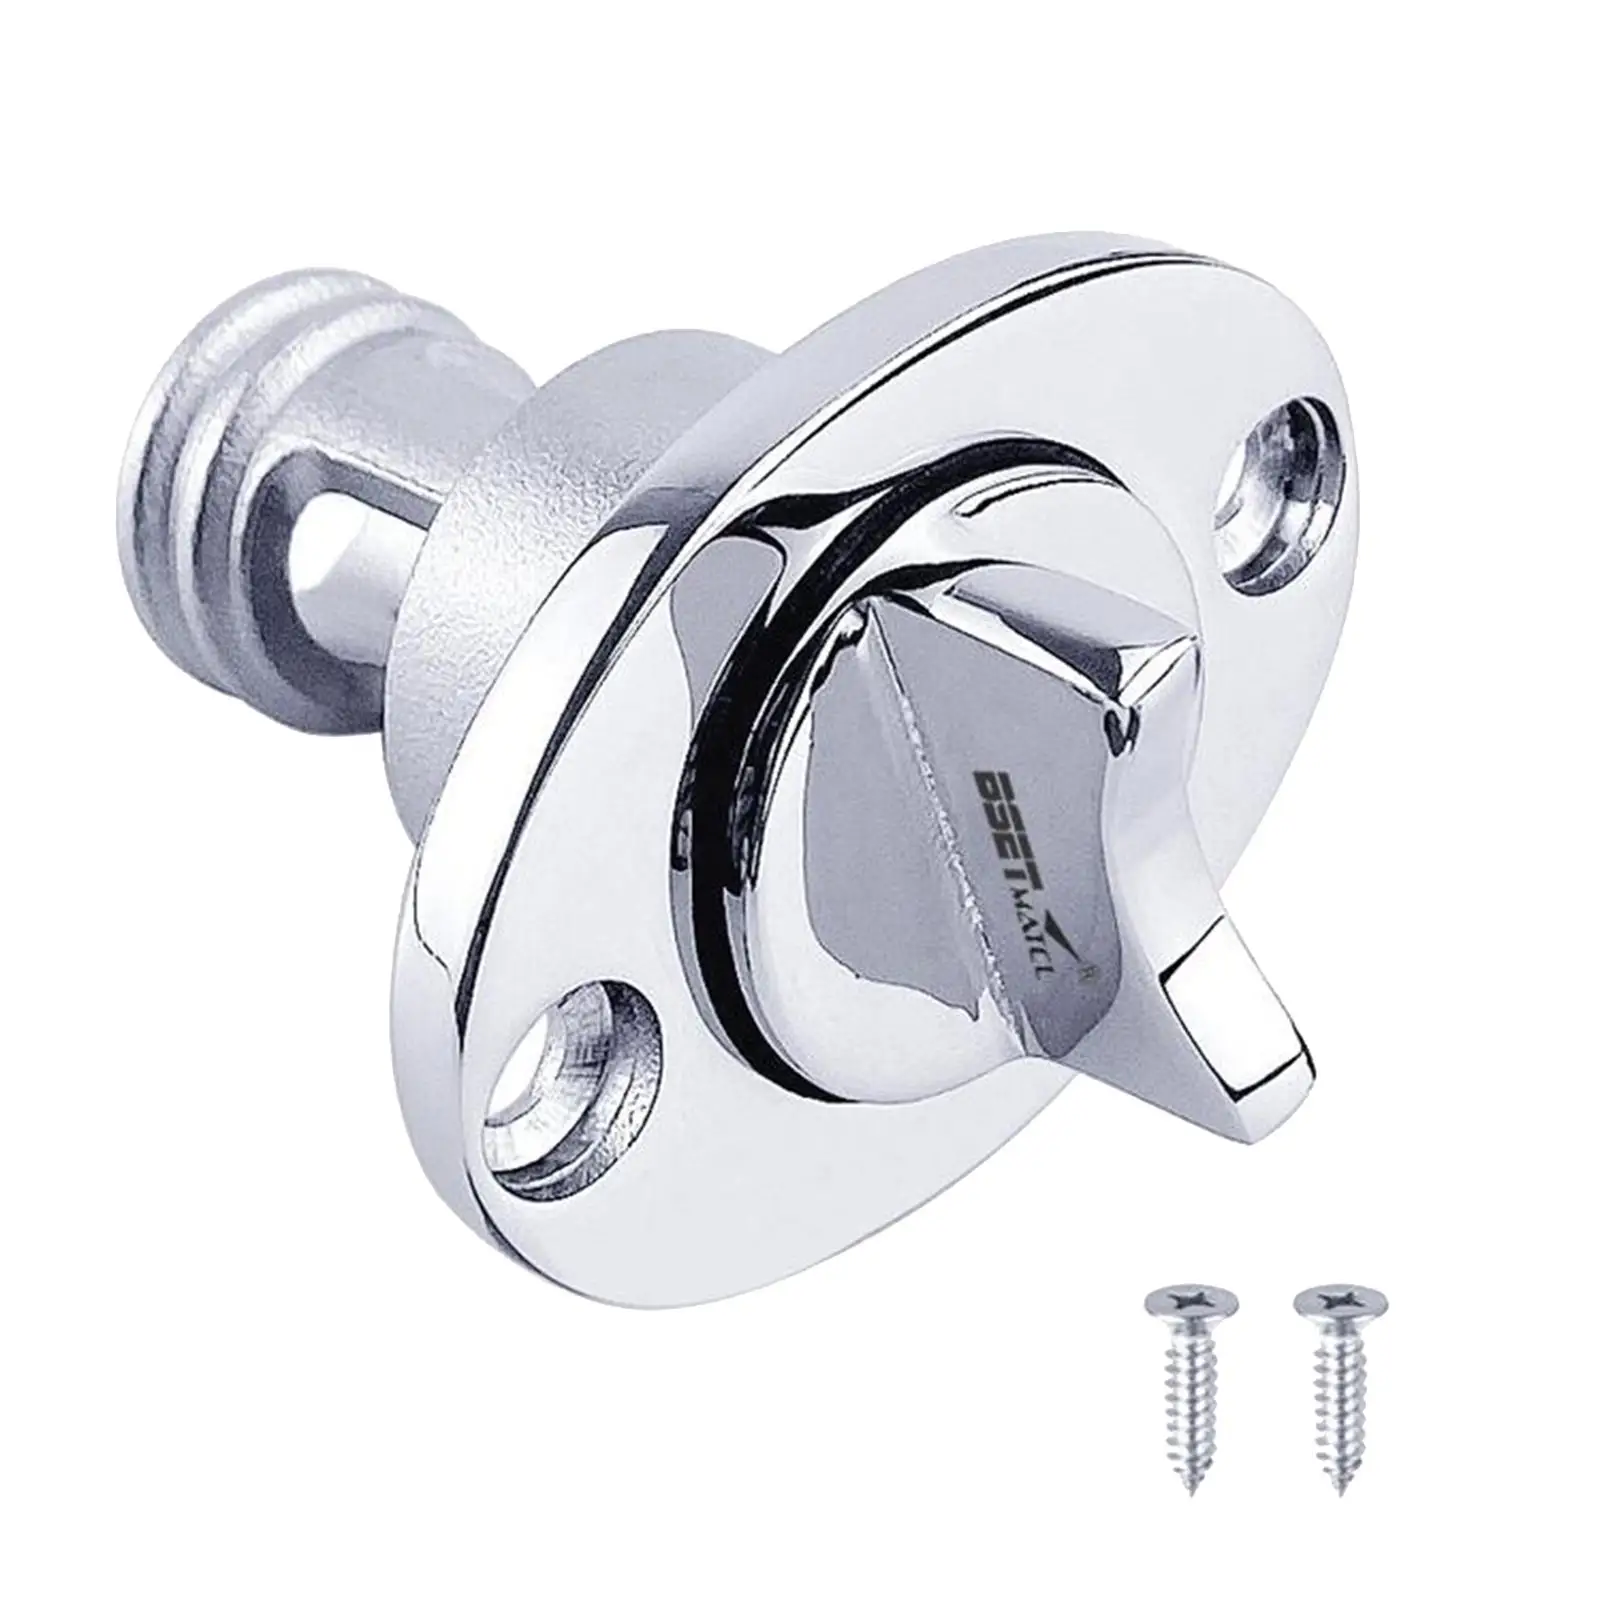 Sliver Marine Boat Stainless Steel Boat board Drain Plug for 1`` Hole Screw Thread